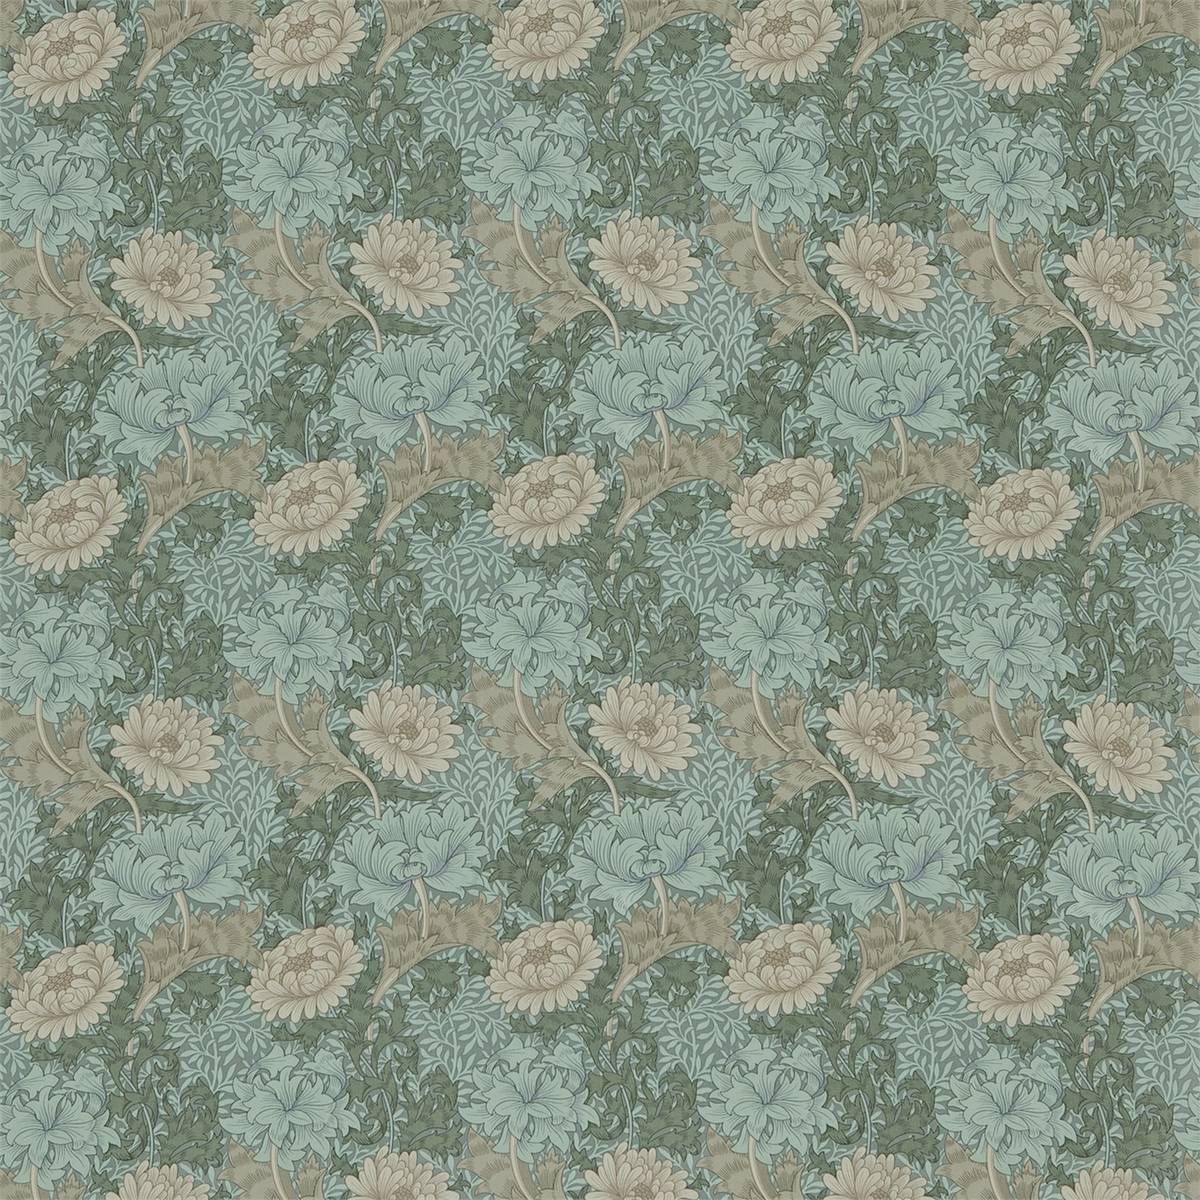 Chrysanthemum Green/Biscuit Fabric by William Morris & Co.